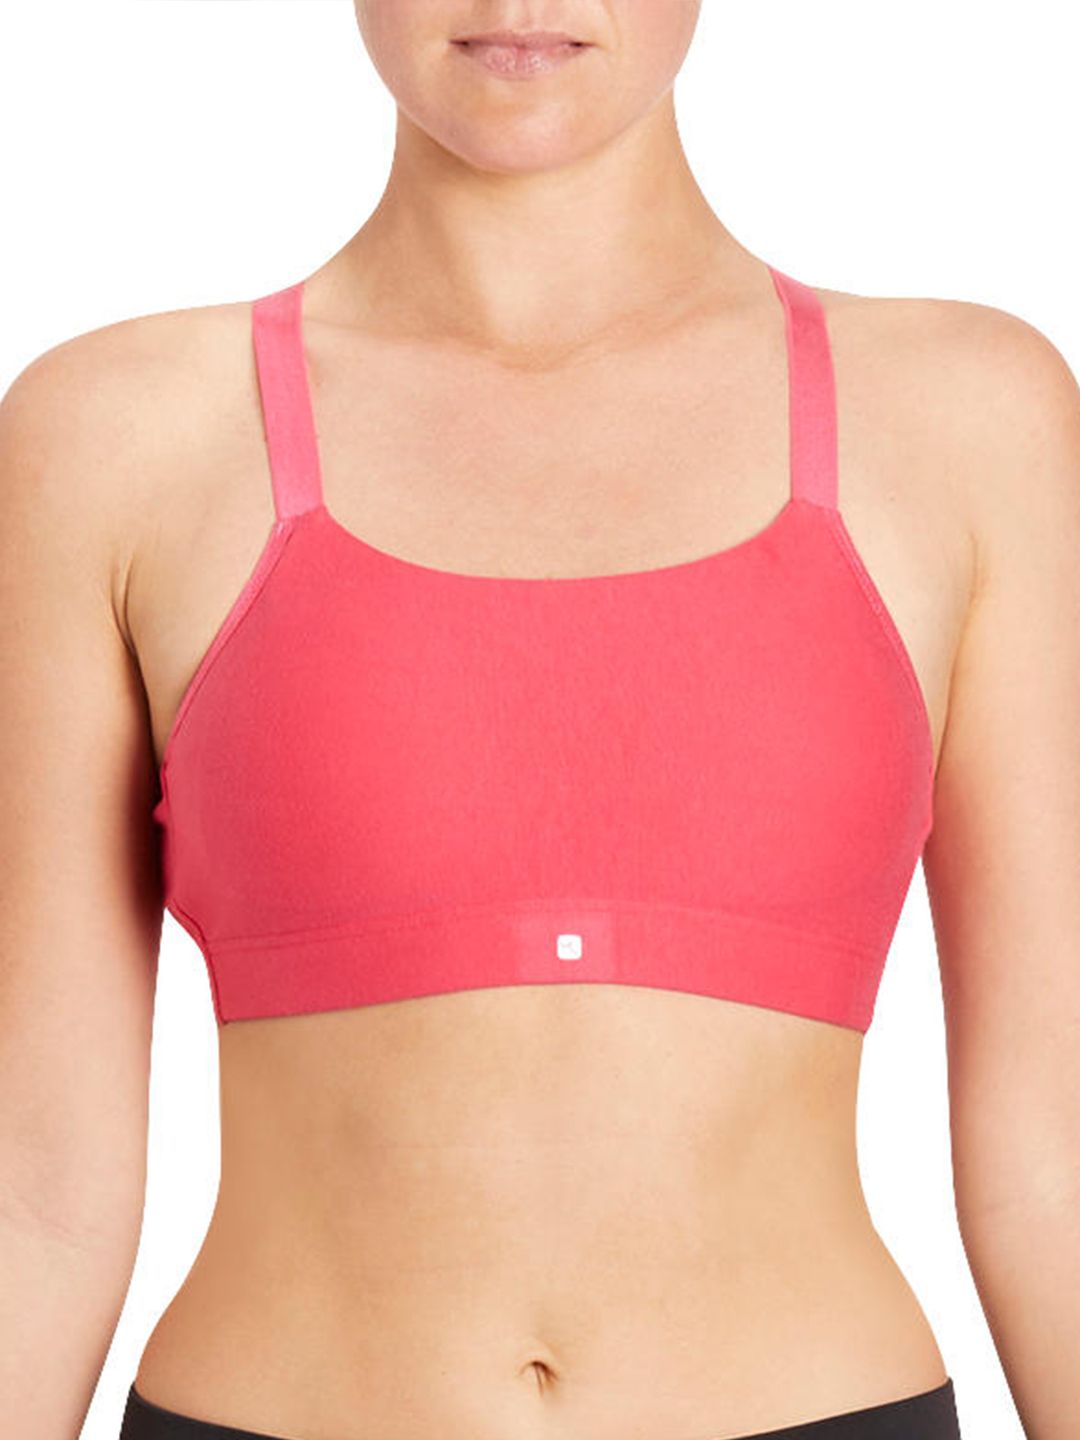 Domyos By Decathlon Pink Workout Bra Full Coverage Underwired Lightly Padded Price in India